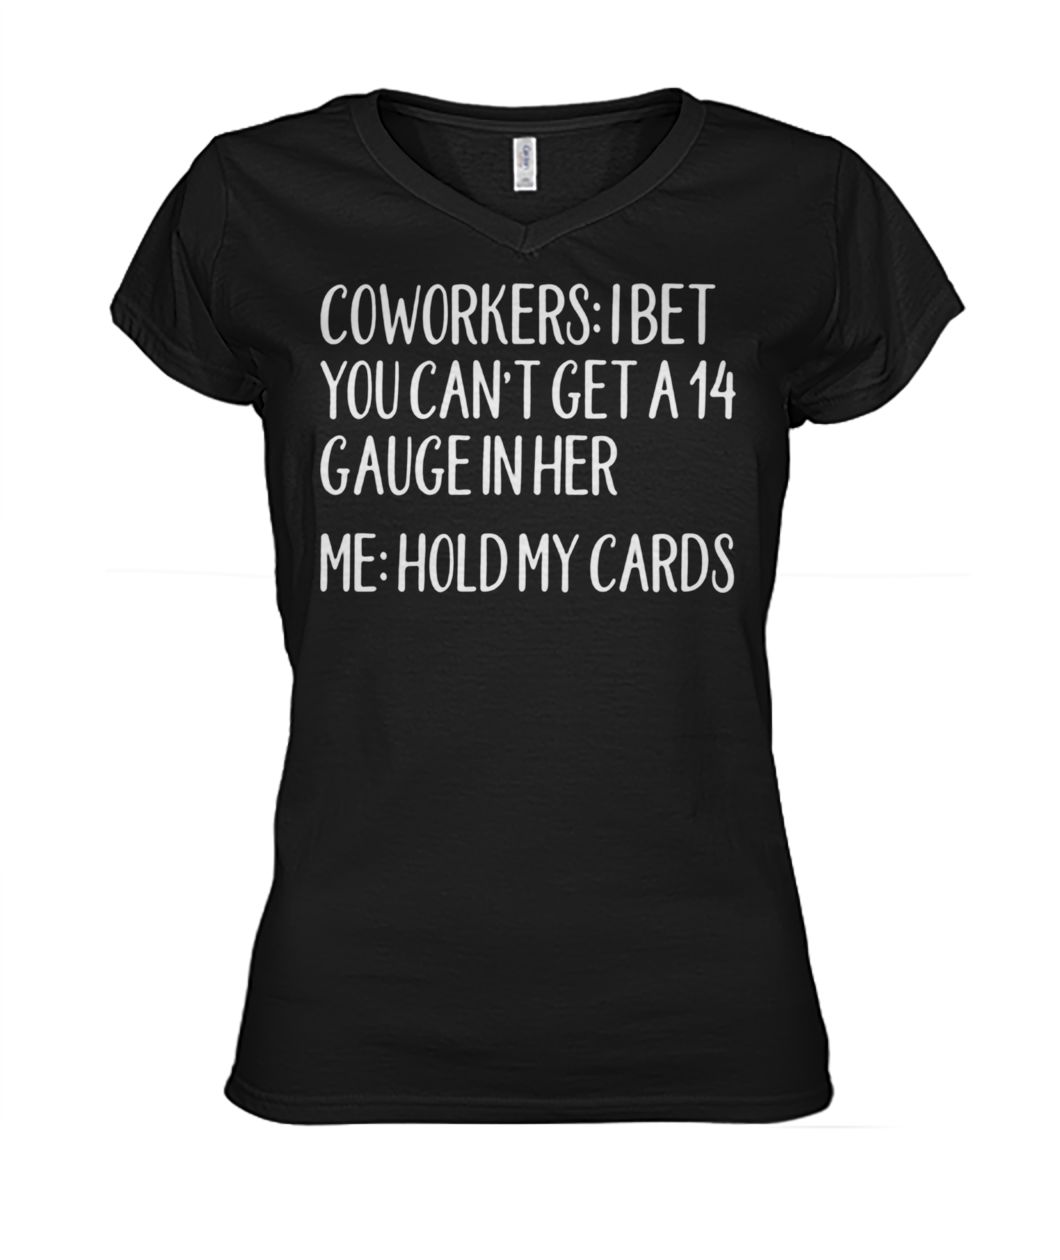 Coworkers I bet you can't get a 14 gauge in her me hold my cards women's v-neck